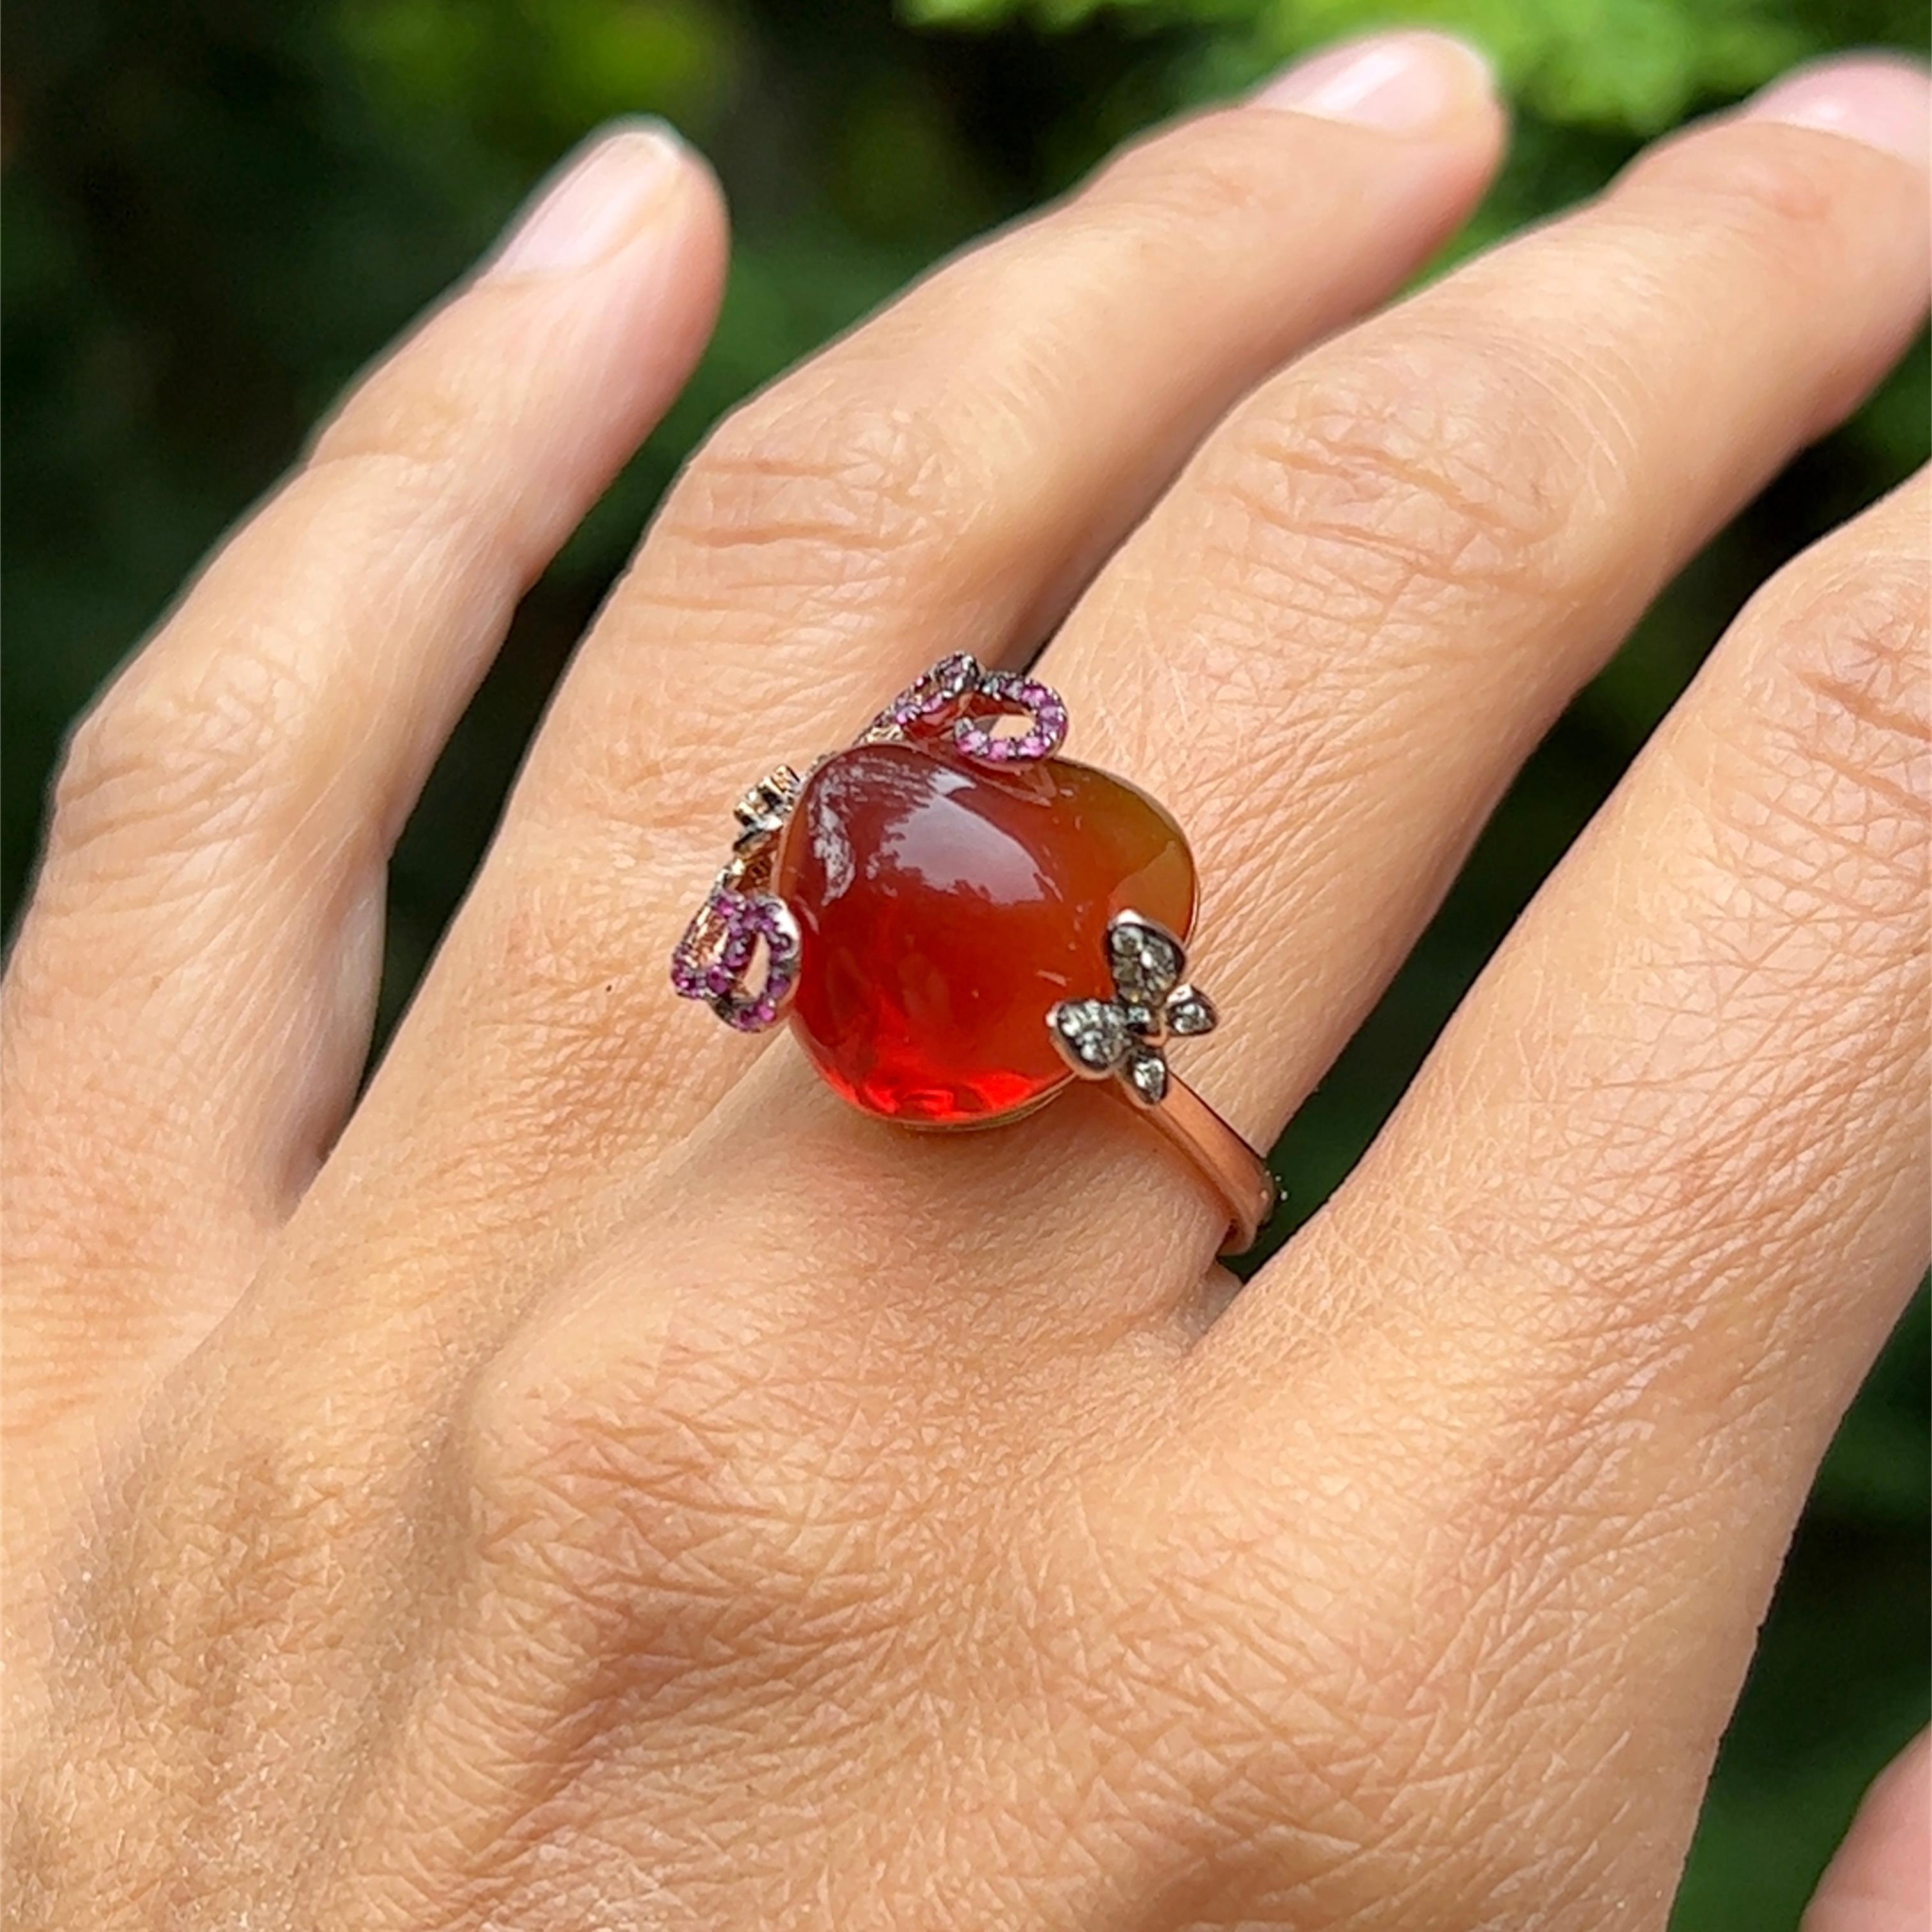 12.24 Carat Mexican Fire Opal with Diamonds and Rubies in 14K Rose Gold 4